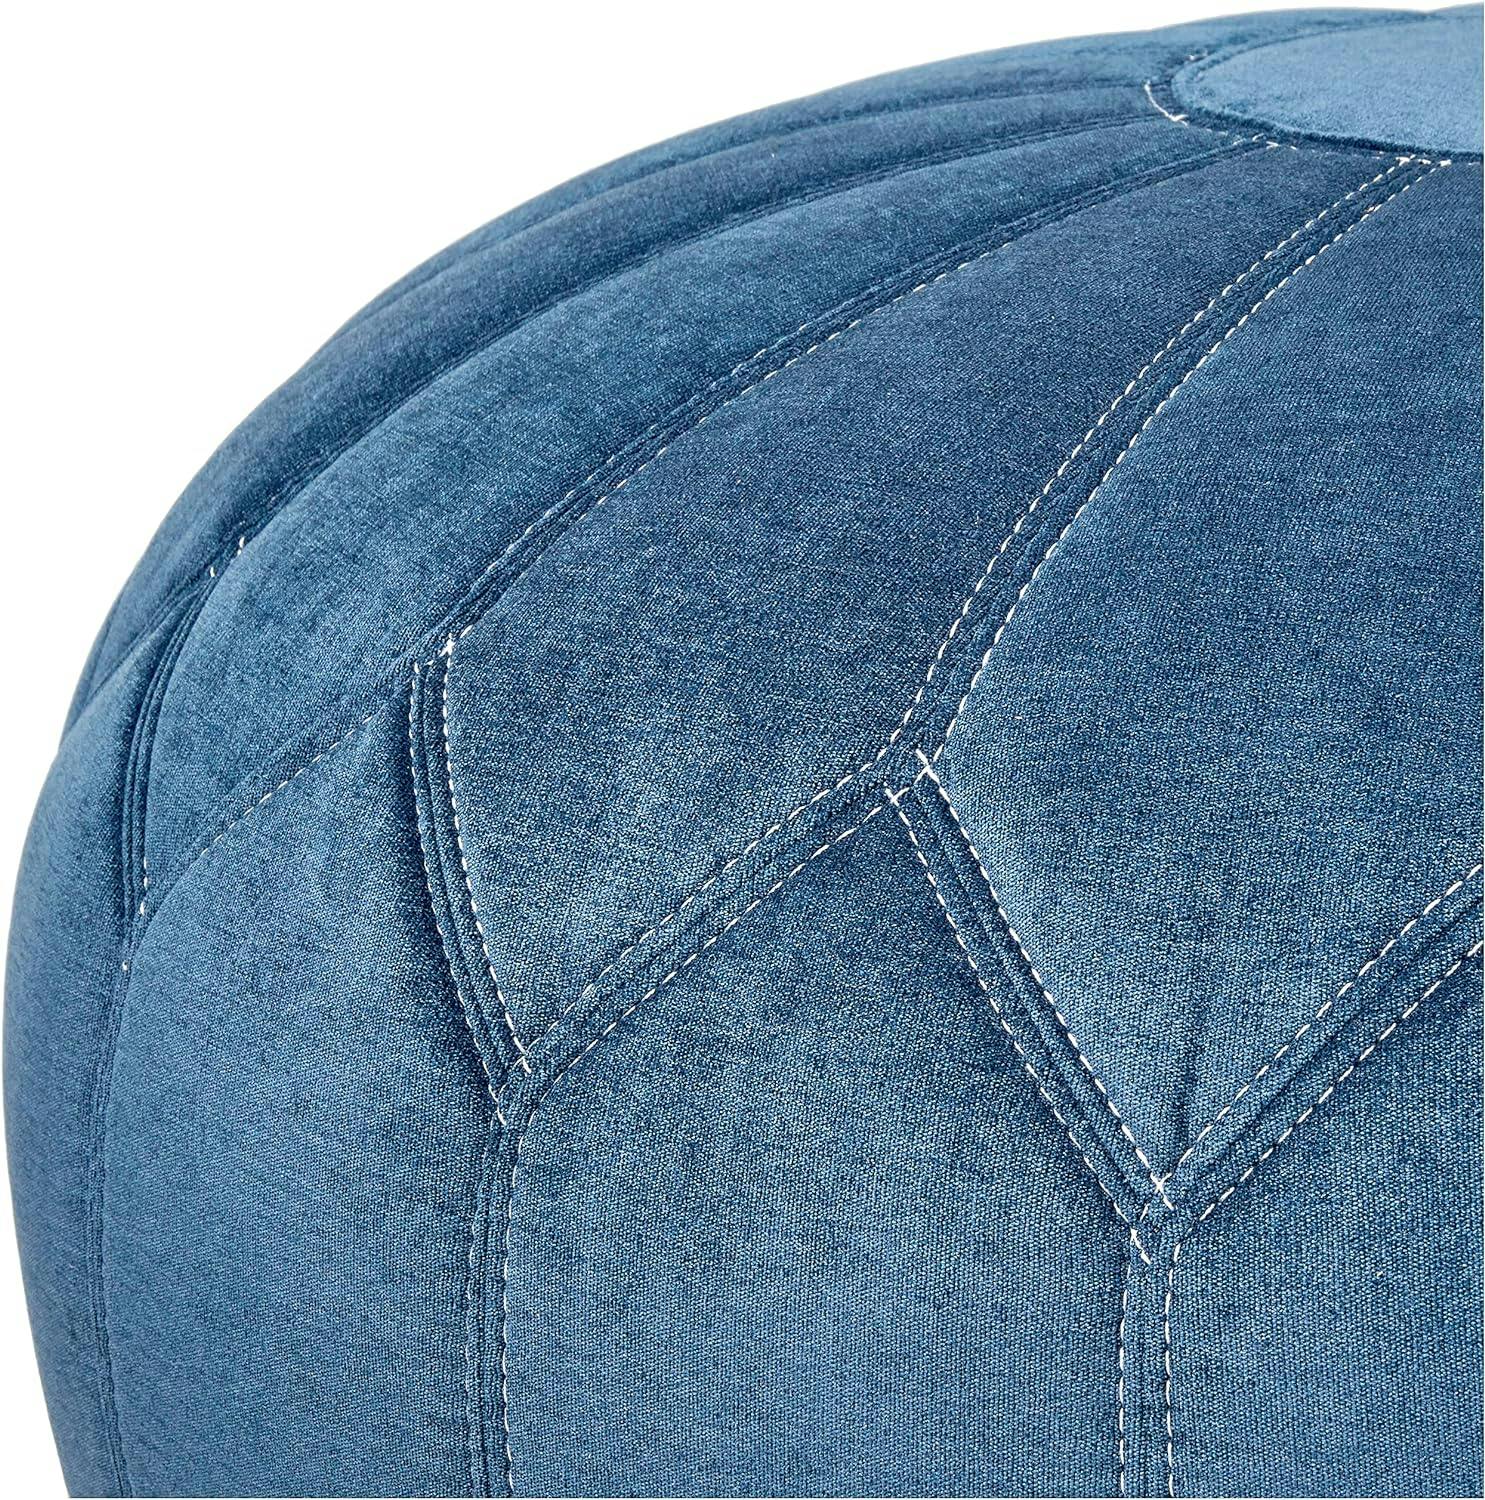 Blue Floral Oversized Round Pouf Ottoman with White Stitching